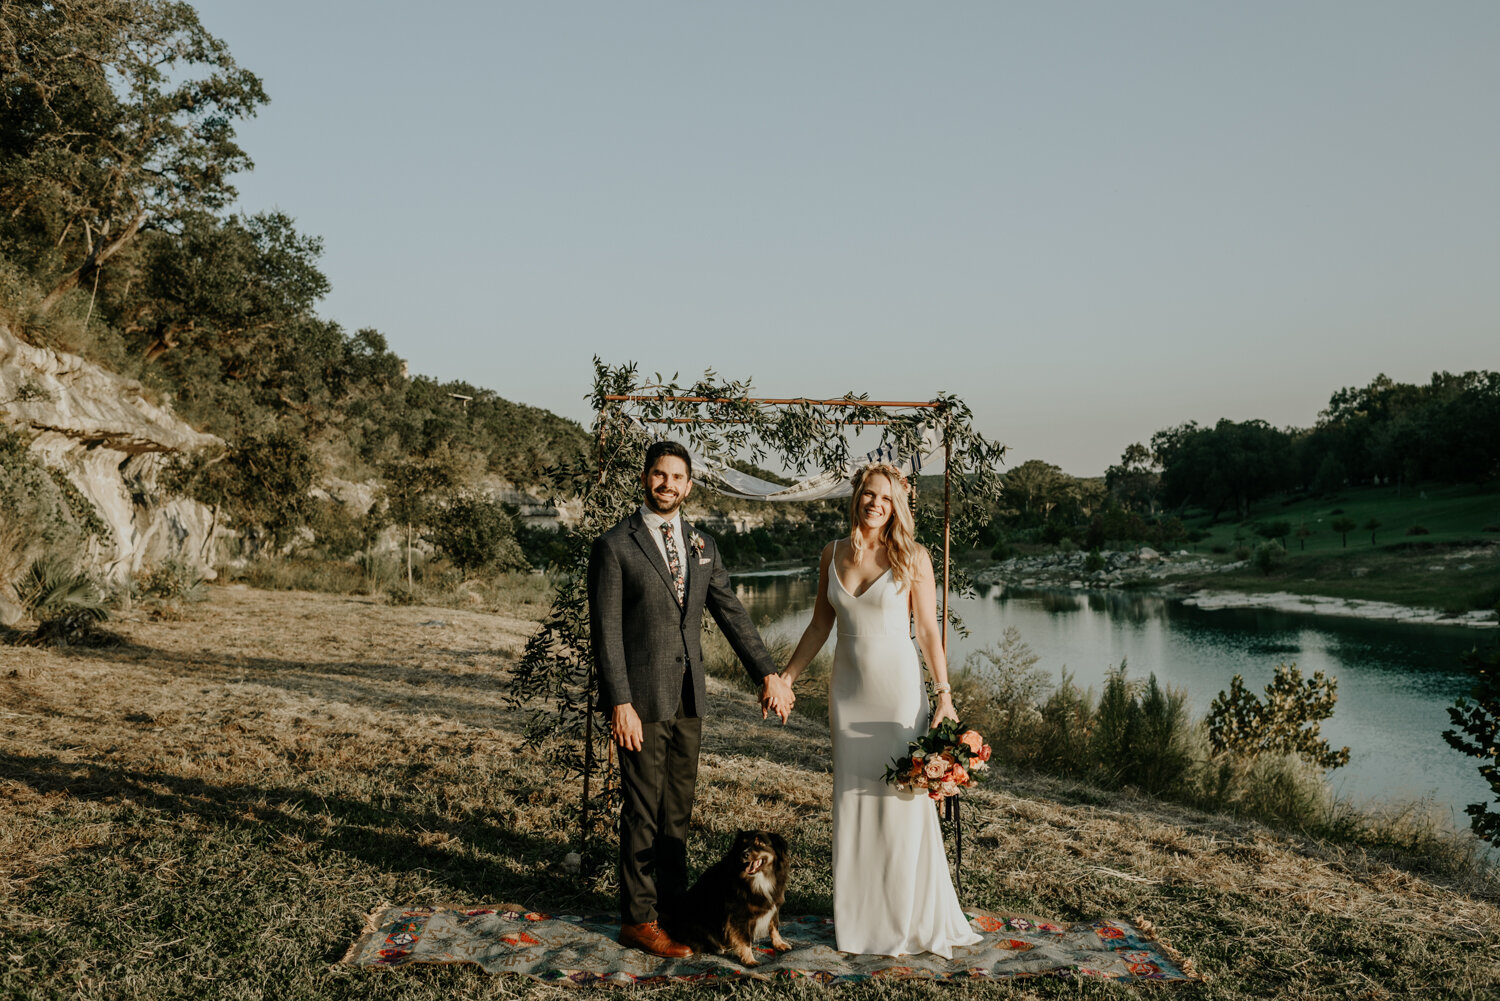 Austin, Texas Cute Elopement Photos with dogs